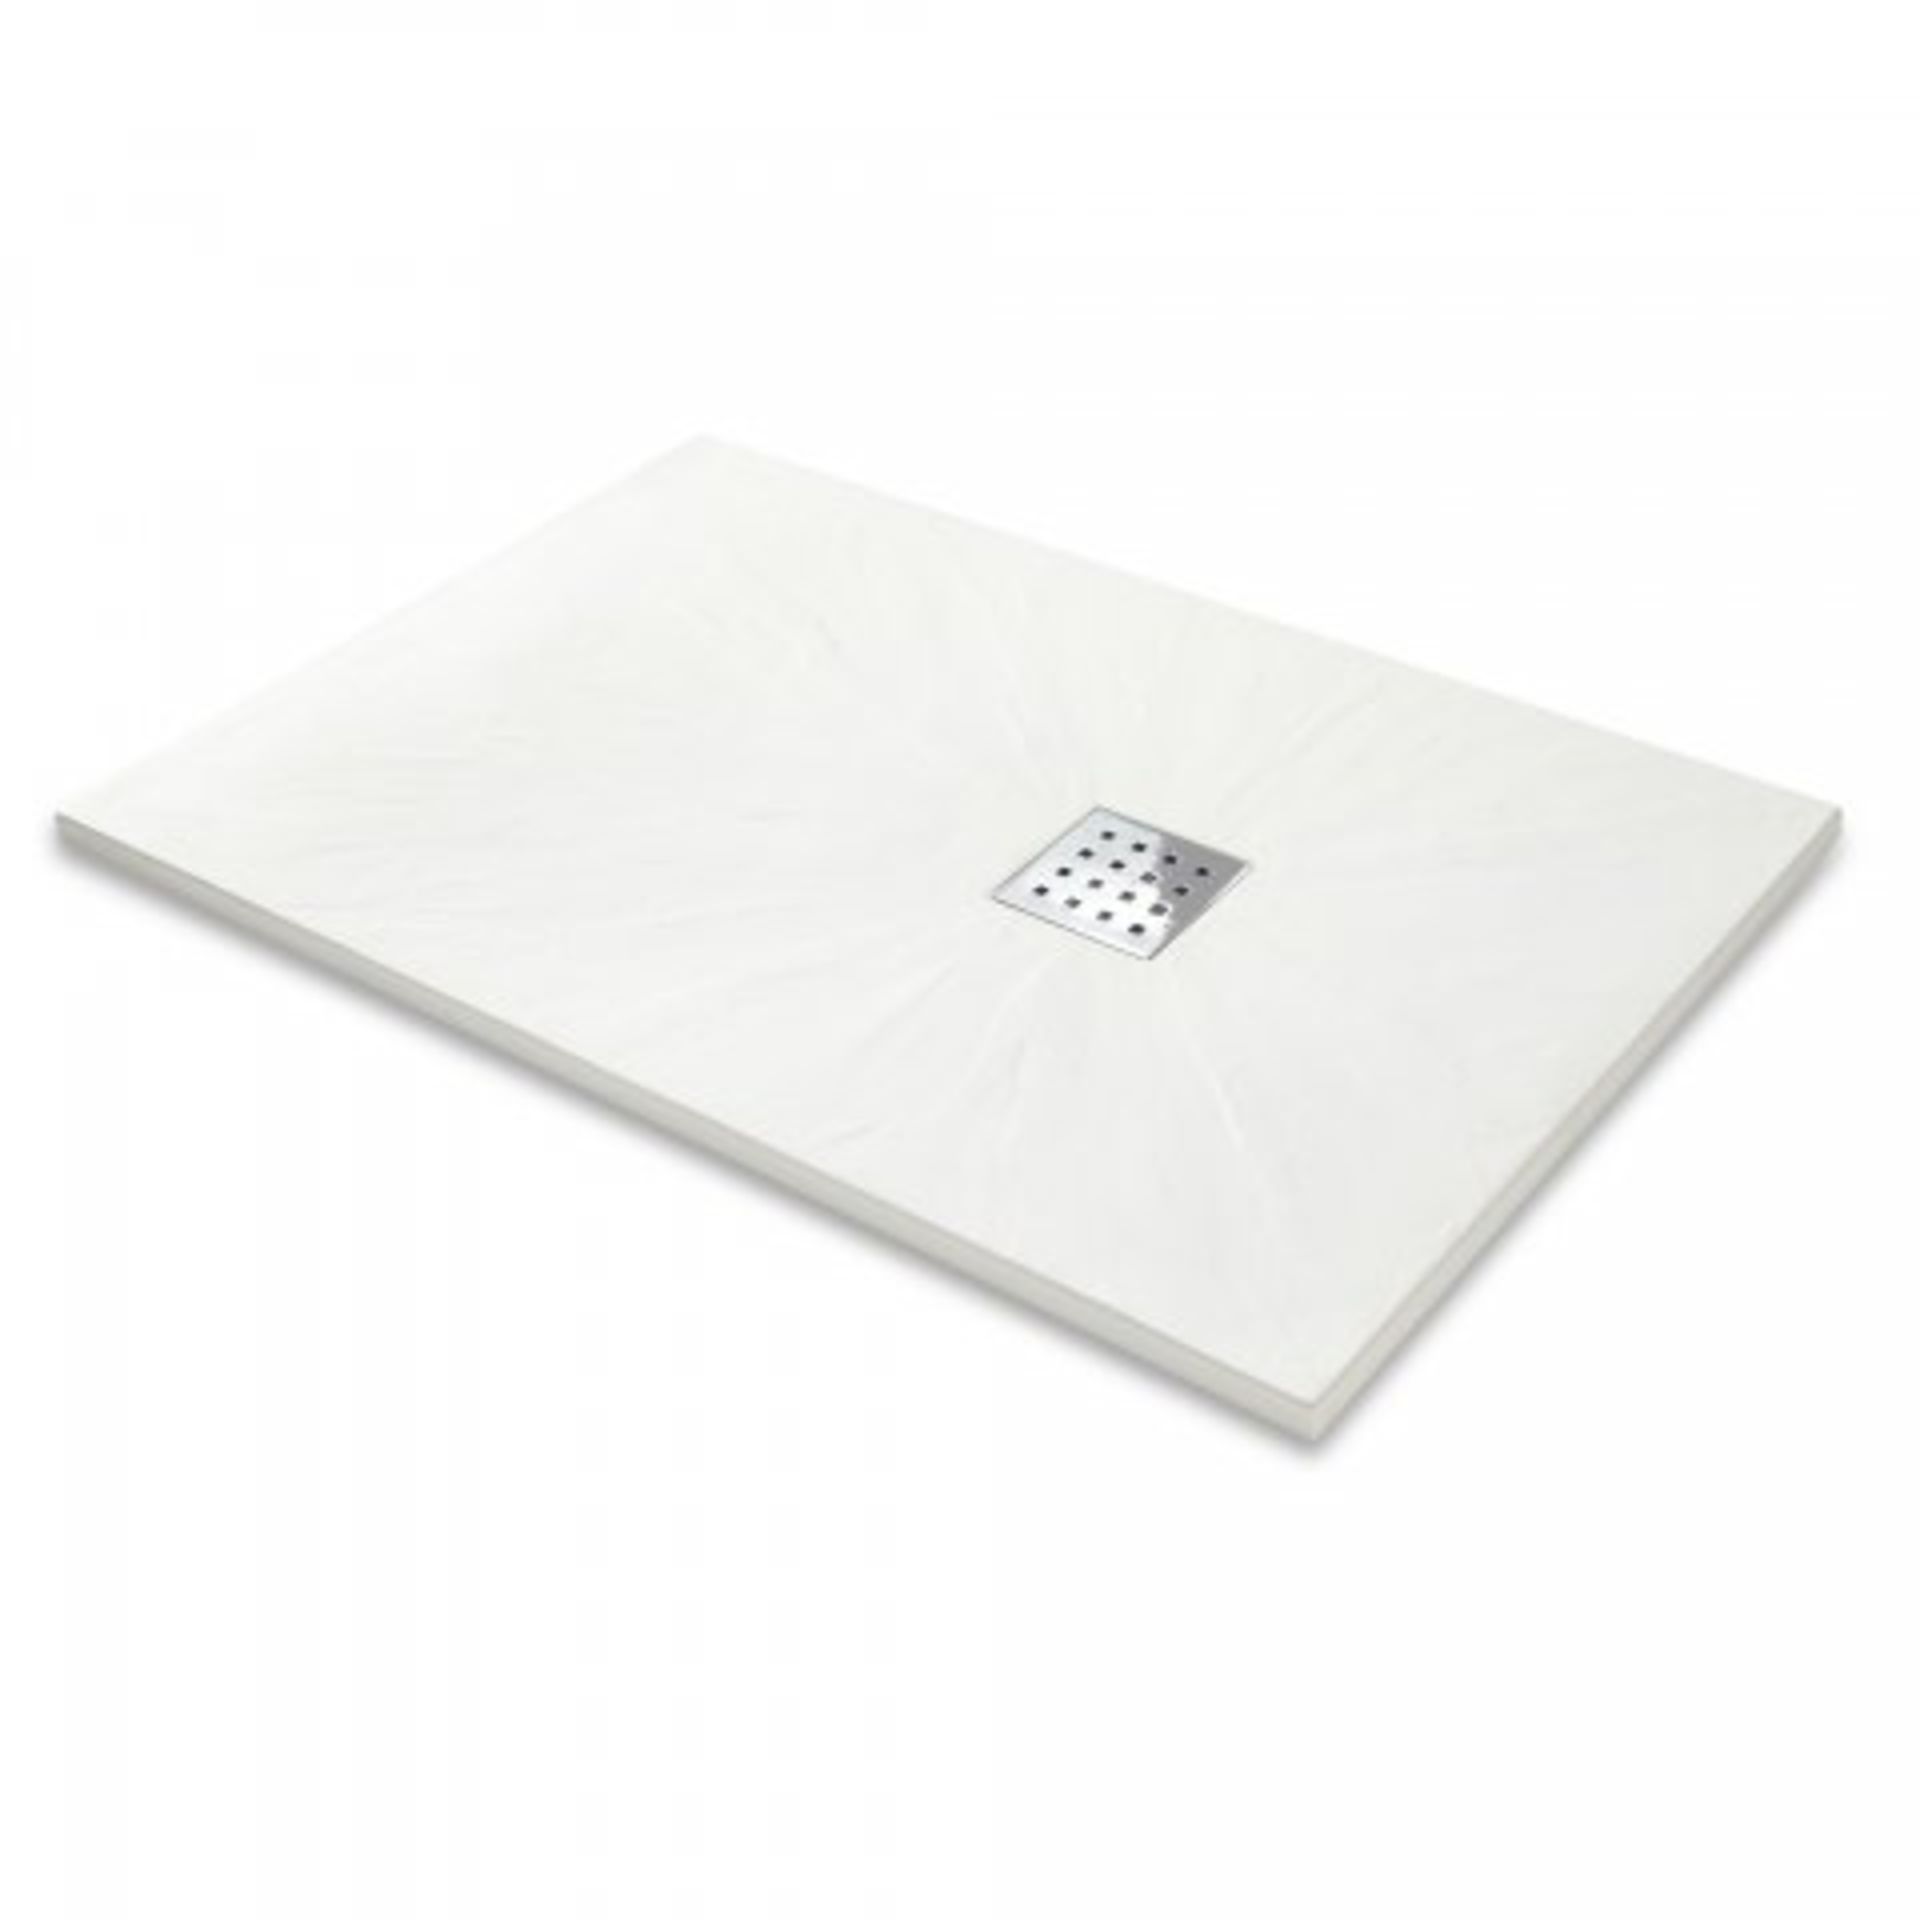 New & Boxed 1200x800mm Rectangular White Slate Effect Shower Tray. RRP £499.99. Hand Crafted ... - Image 2 of 3